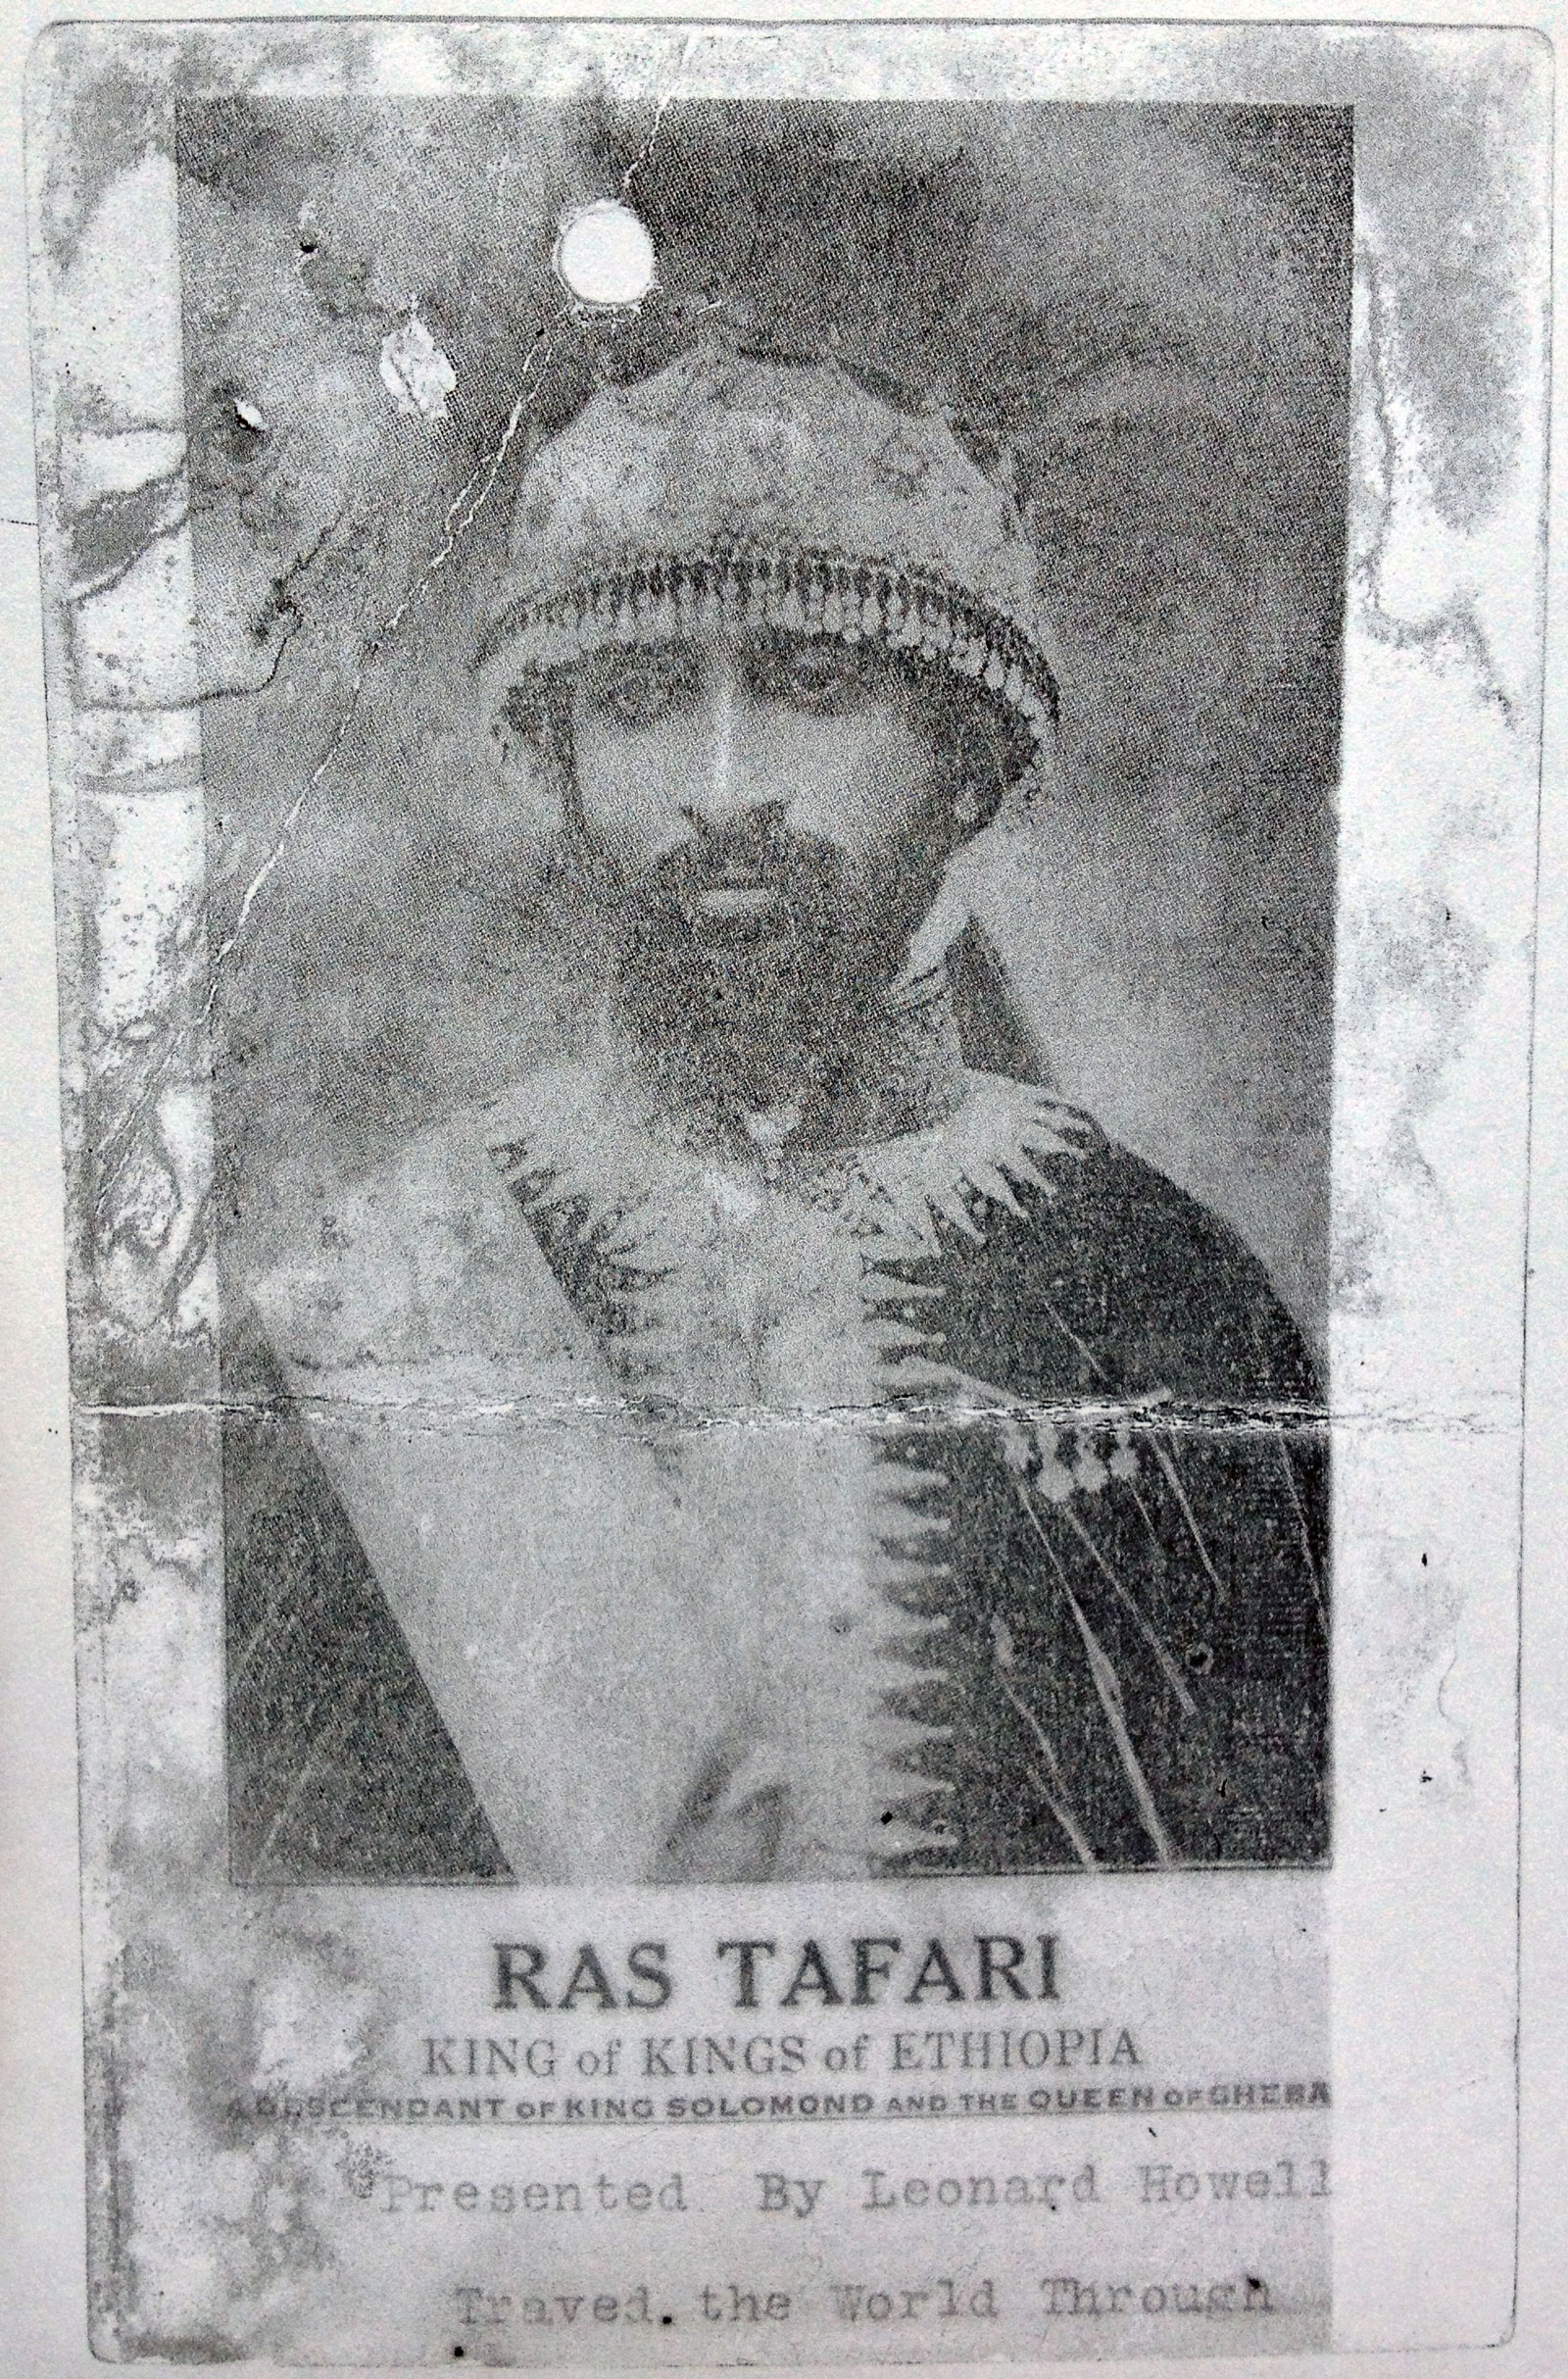 Pamphlet with image of Haile Selassie, distributed by Leonard Howell at his public meetings, circa 1935